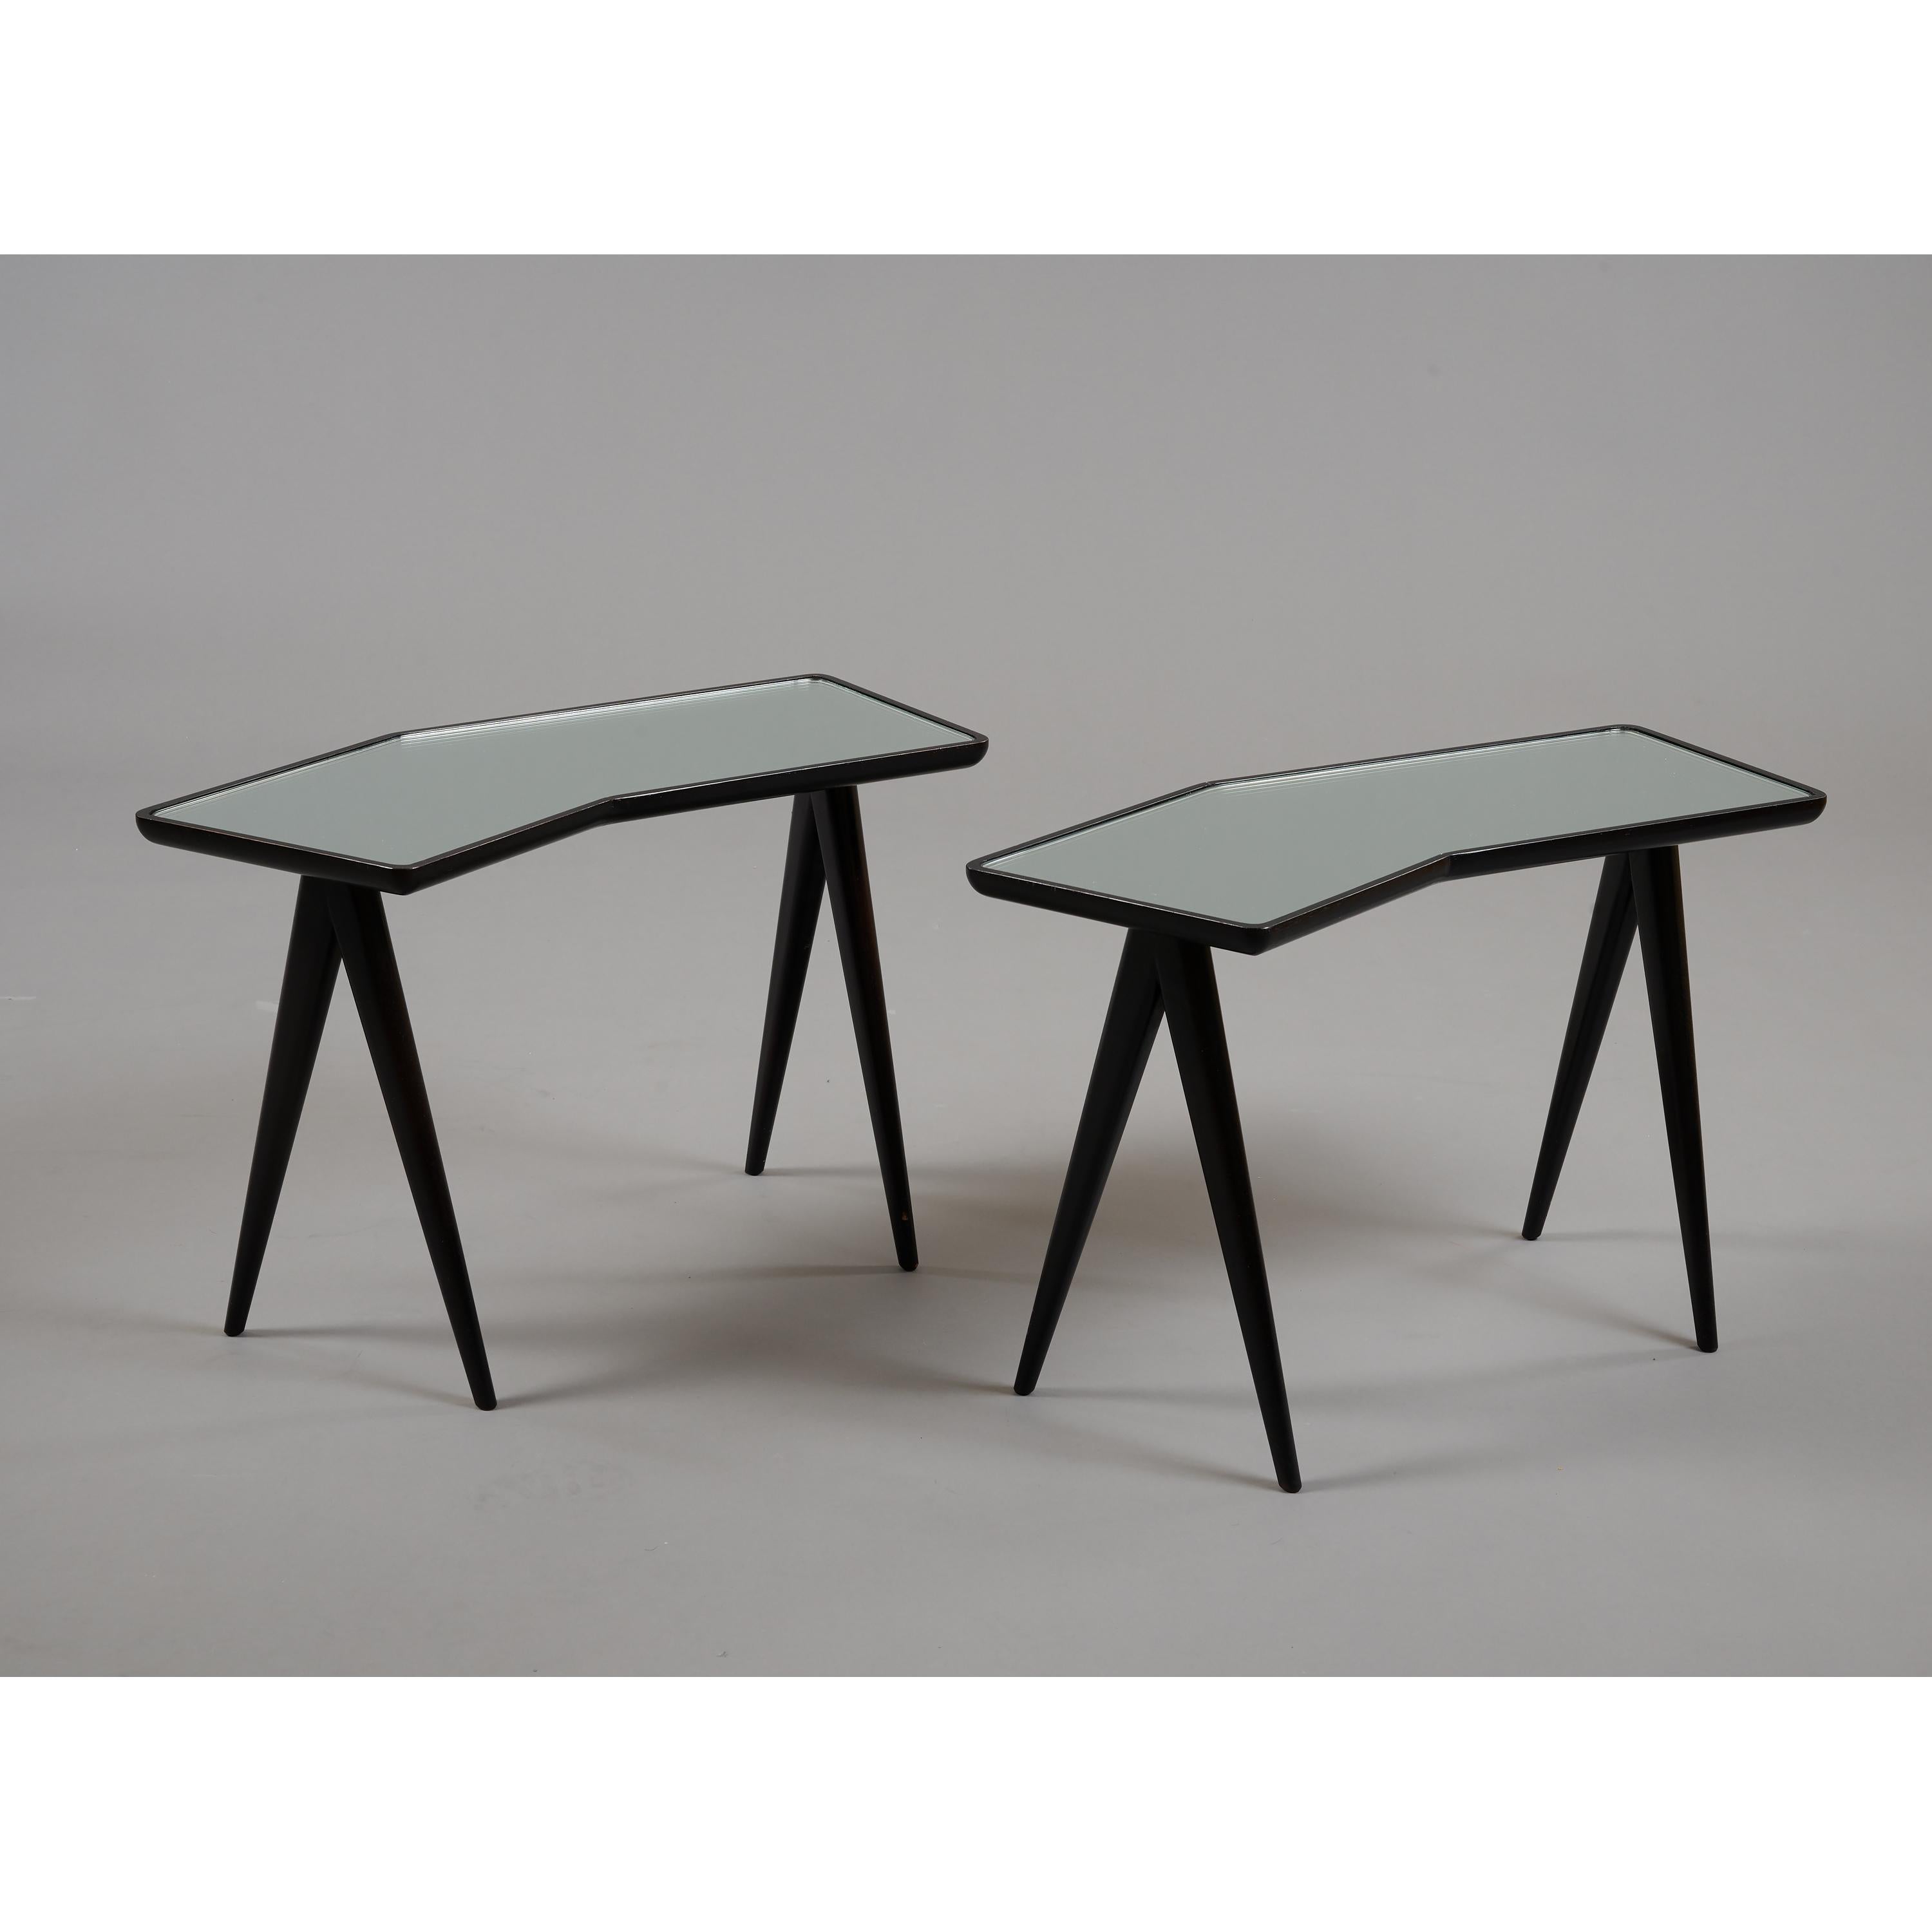 Ebonized Gio Ponti Pair of Geometric Nesting Tables with Mirrored Tops, Italy, 1950's For Sale